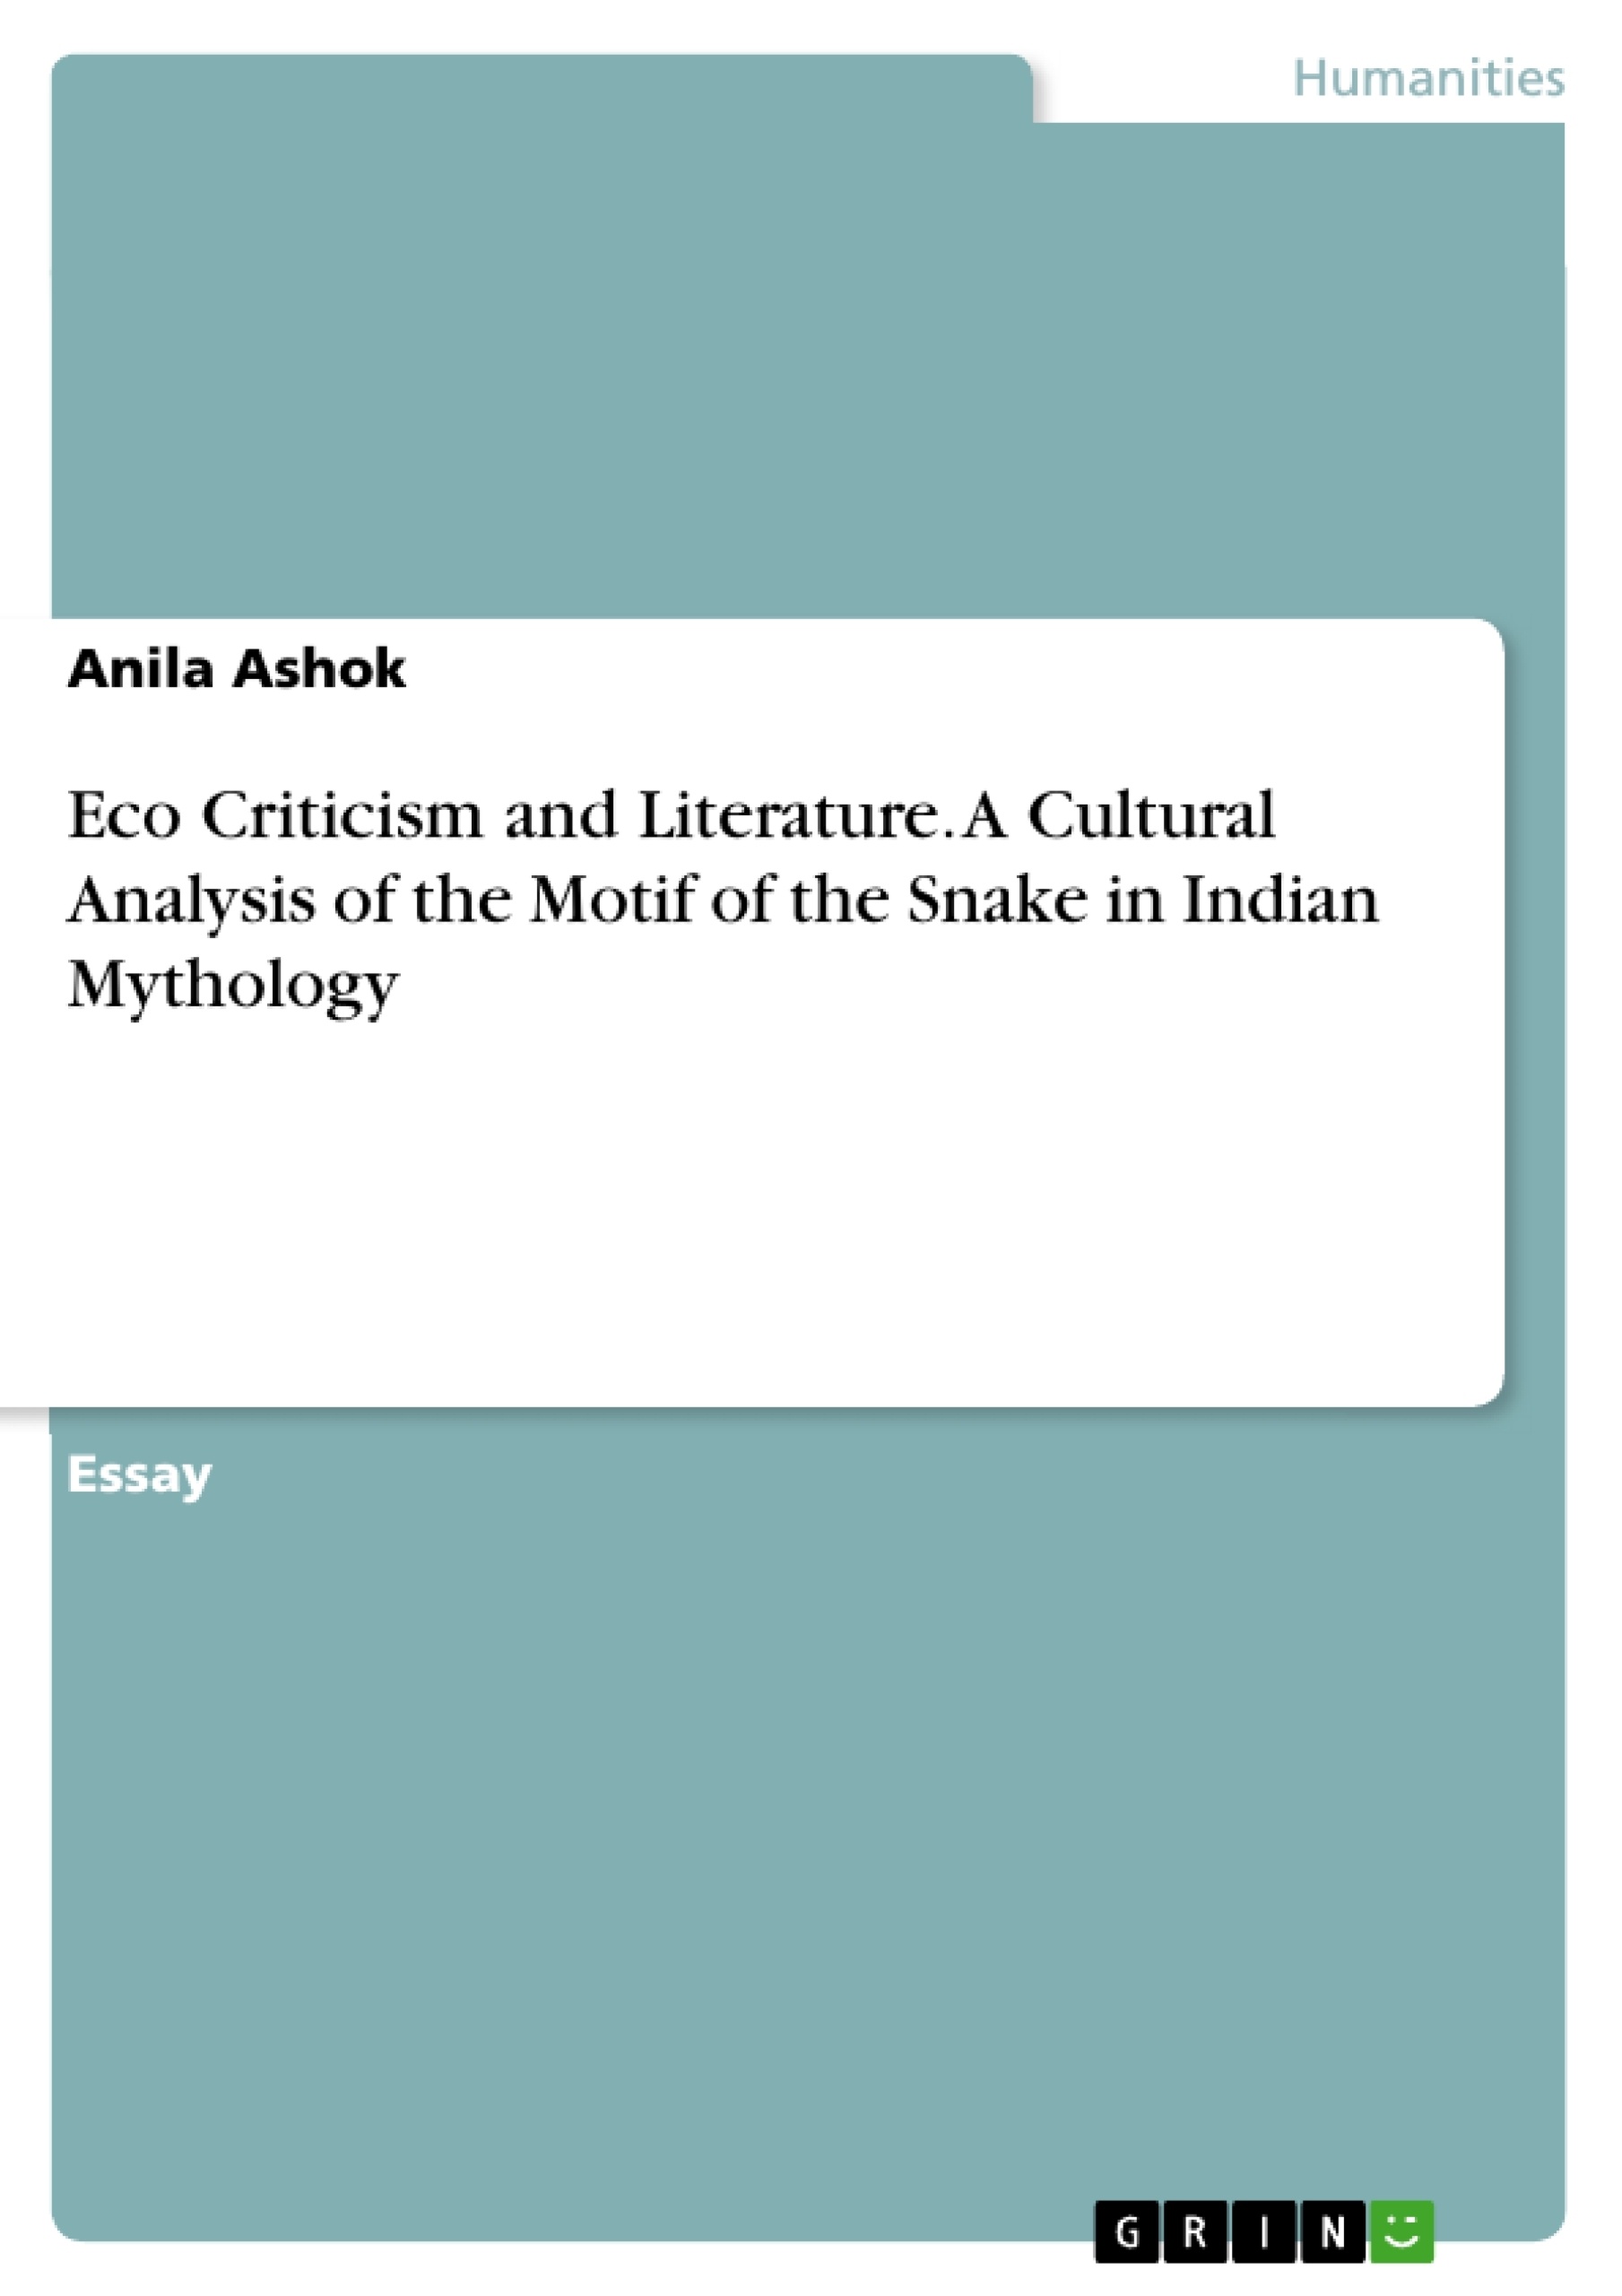 Título: Eco Criticism and Literature. A Cultural Analysis of the Motif of the Snake in Indian Mythology